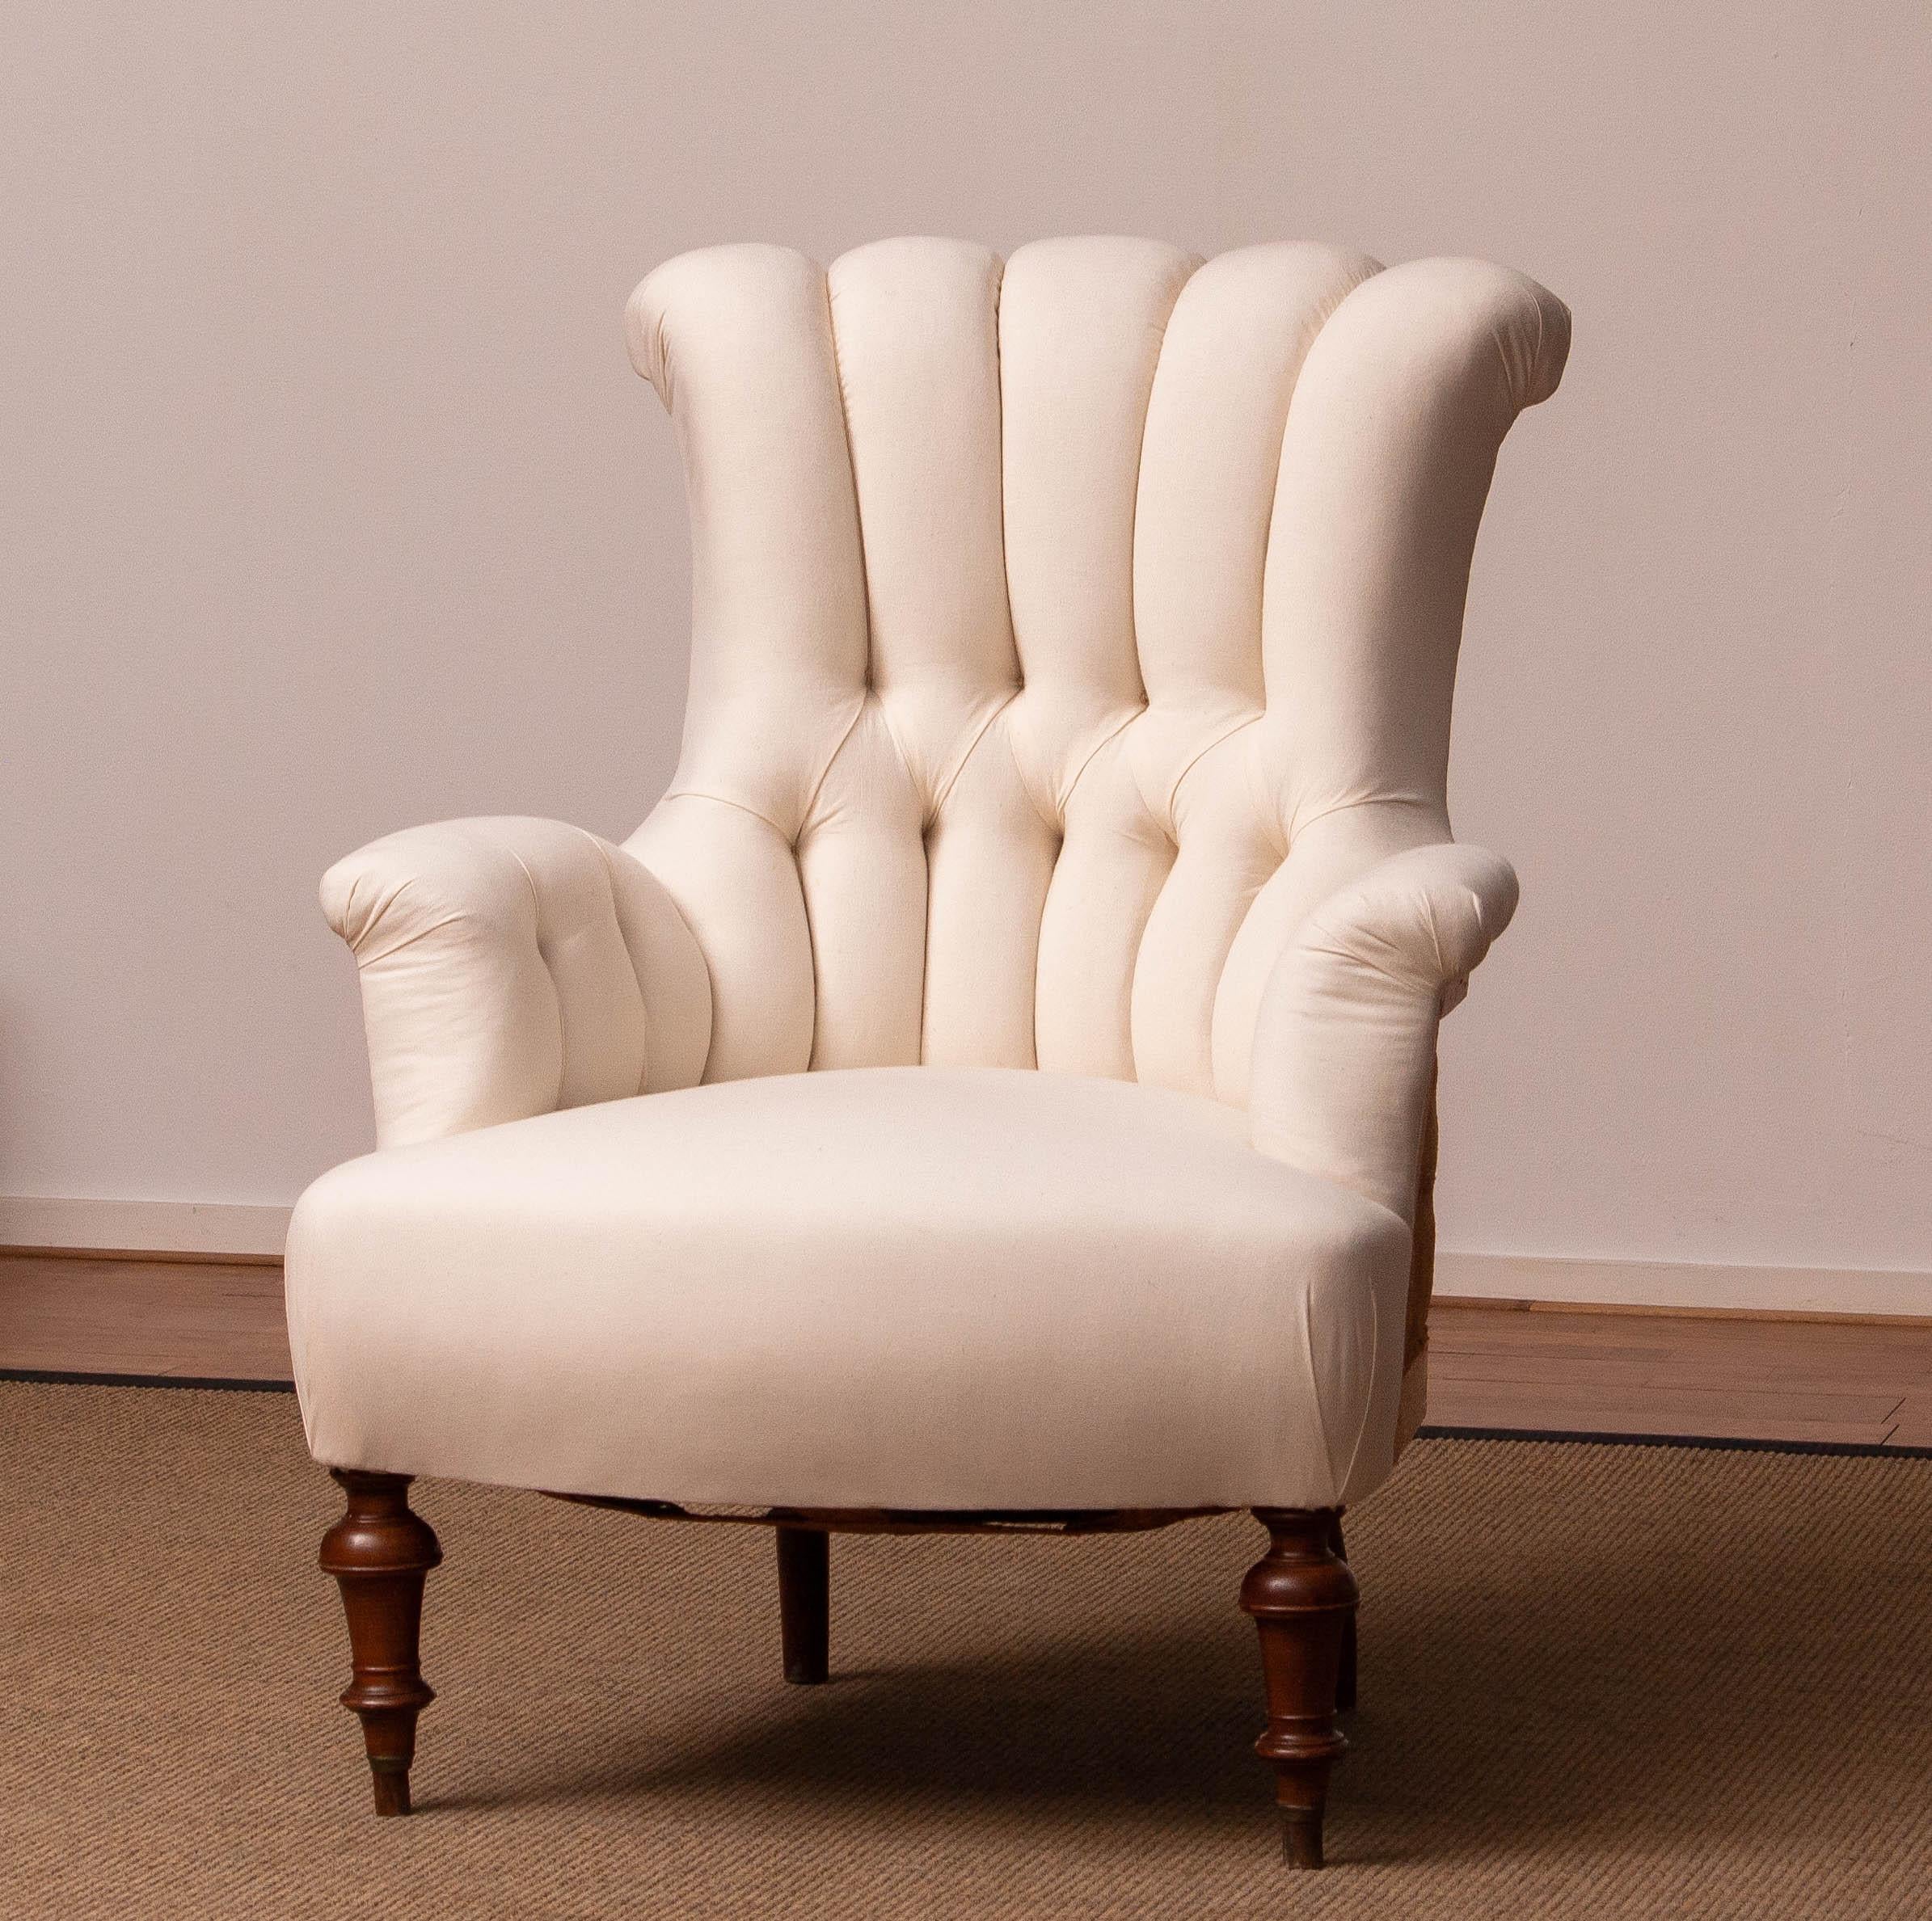 19th Century Domestic Cotton Victorian 'Deconstructed' Tufted Scroll-Back Chair For Sale 8